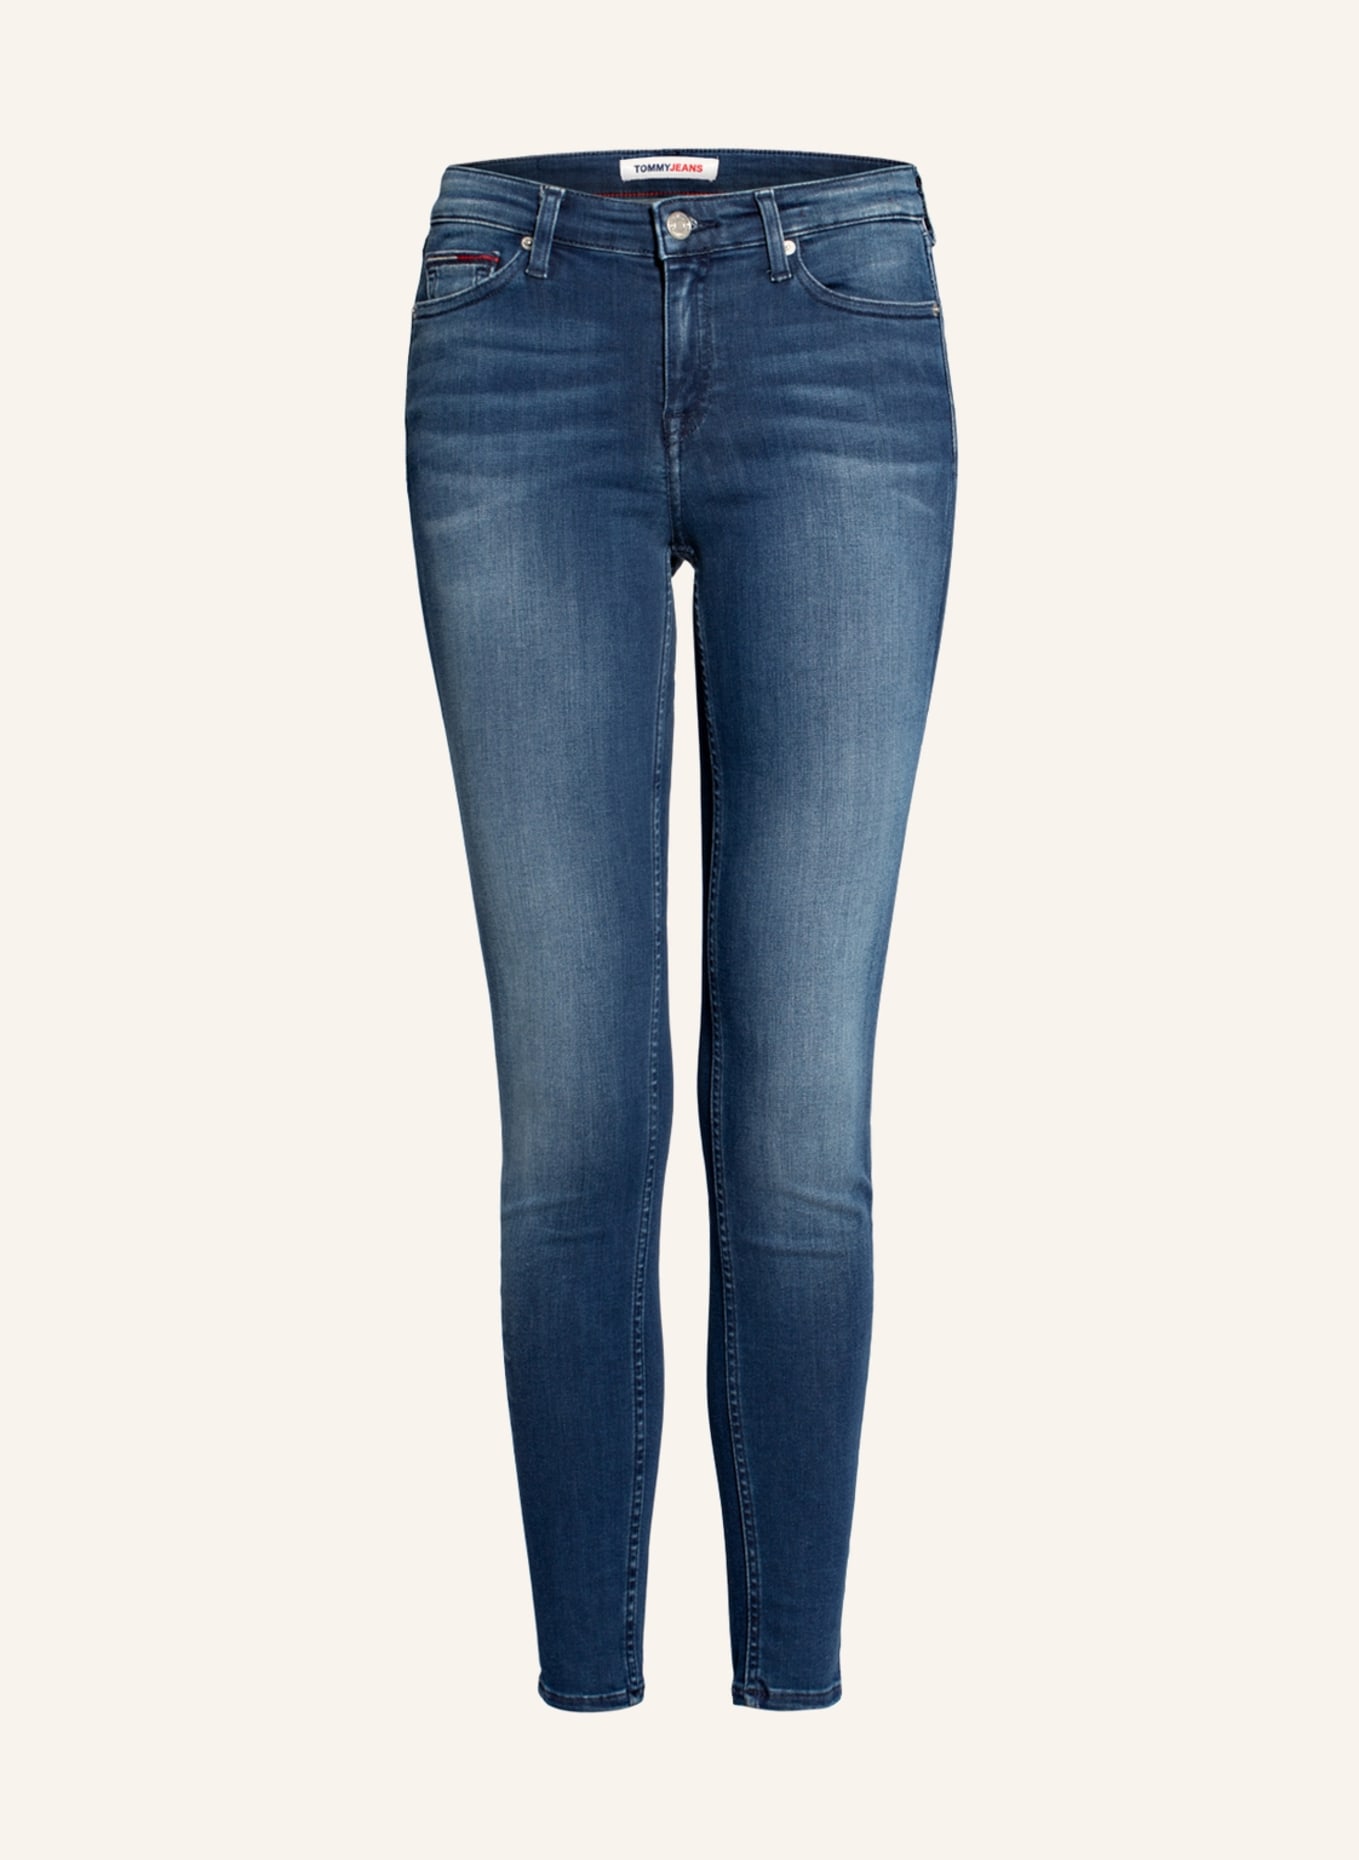 TOMMY JEANS Skinny Jeans NORA, Farbe: 1A5 New Niceville Mid Blue Stretch (Bild 1)